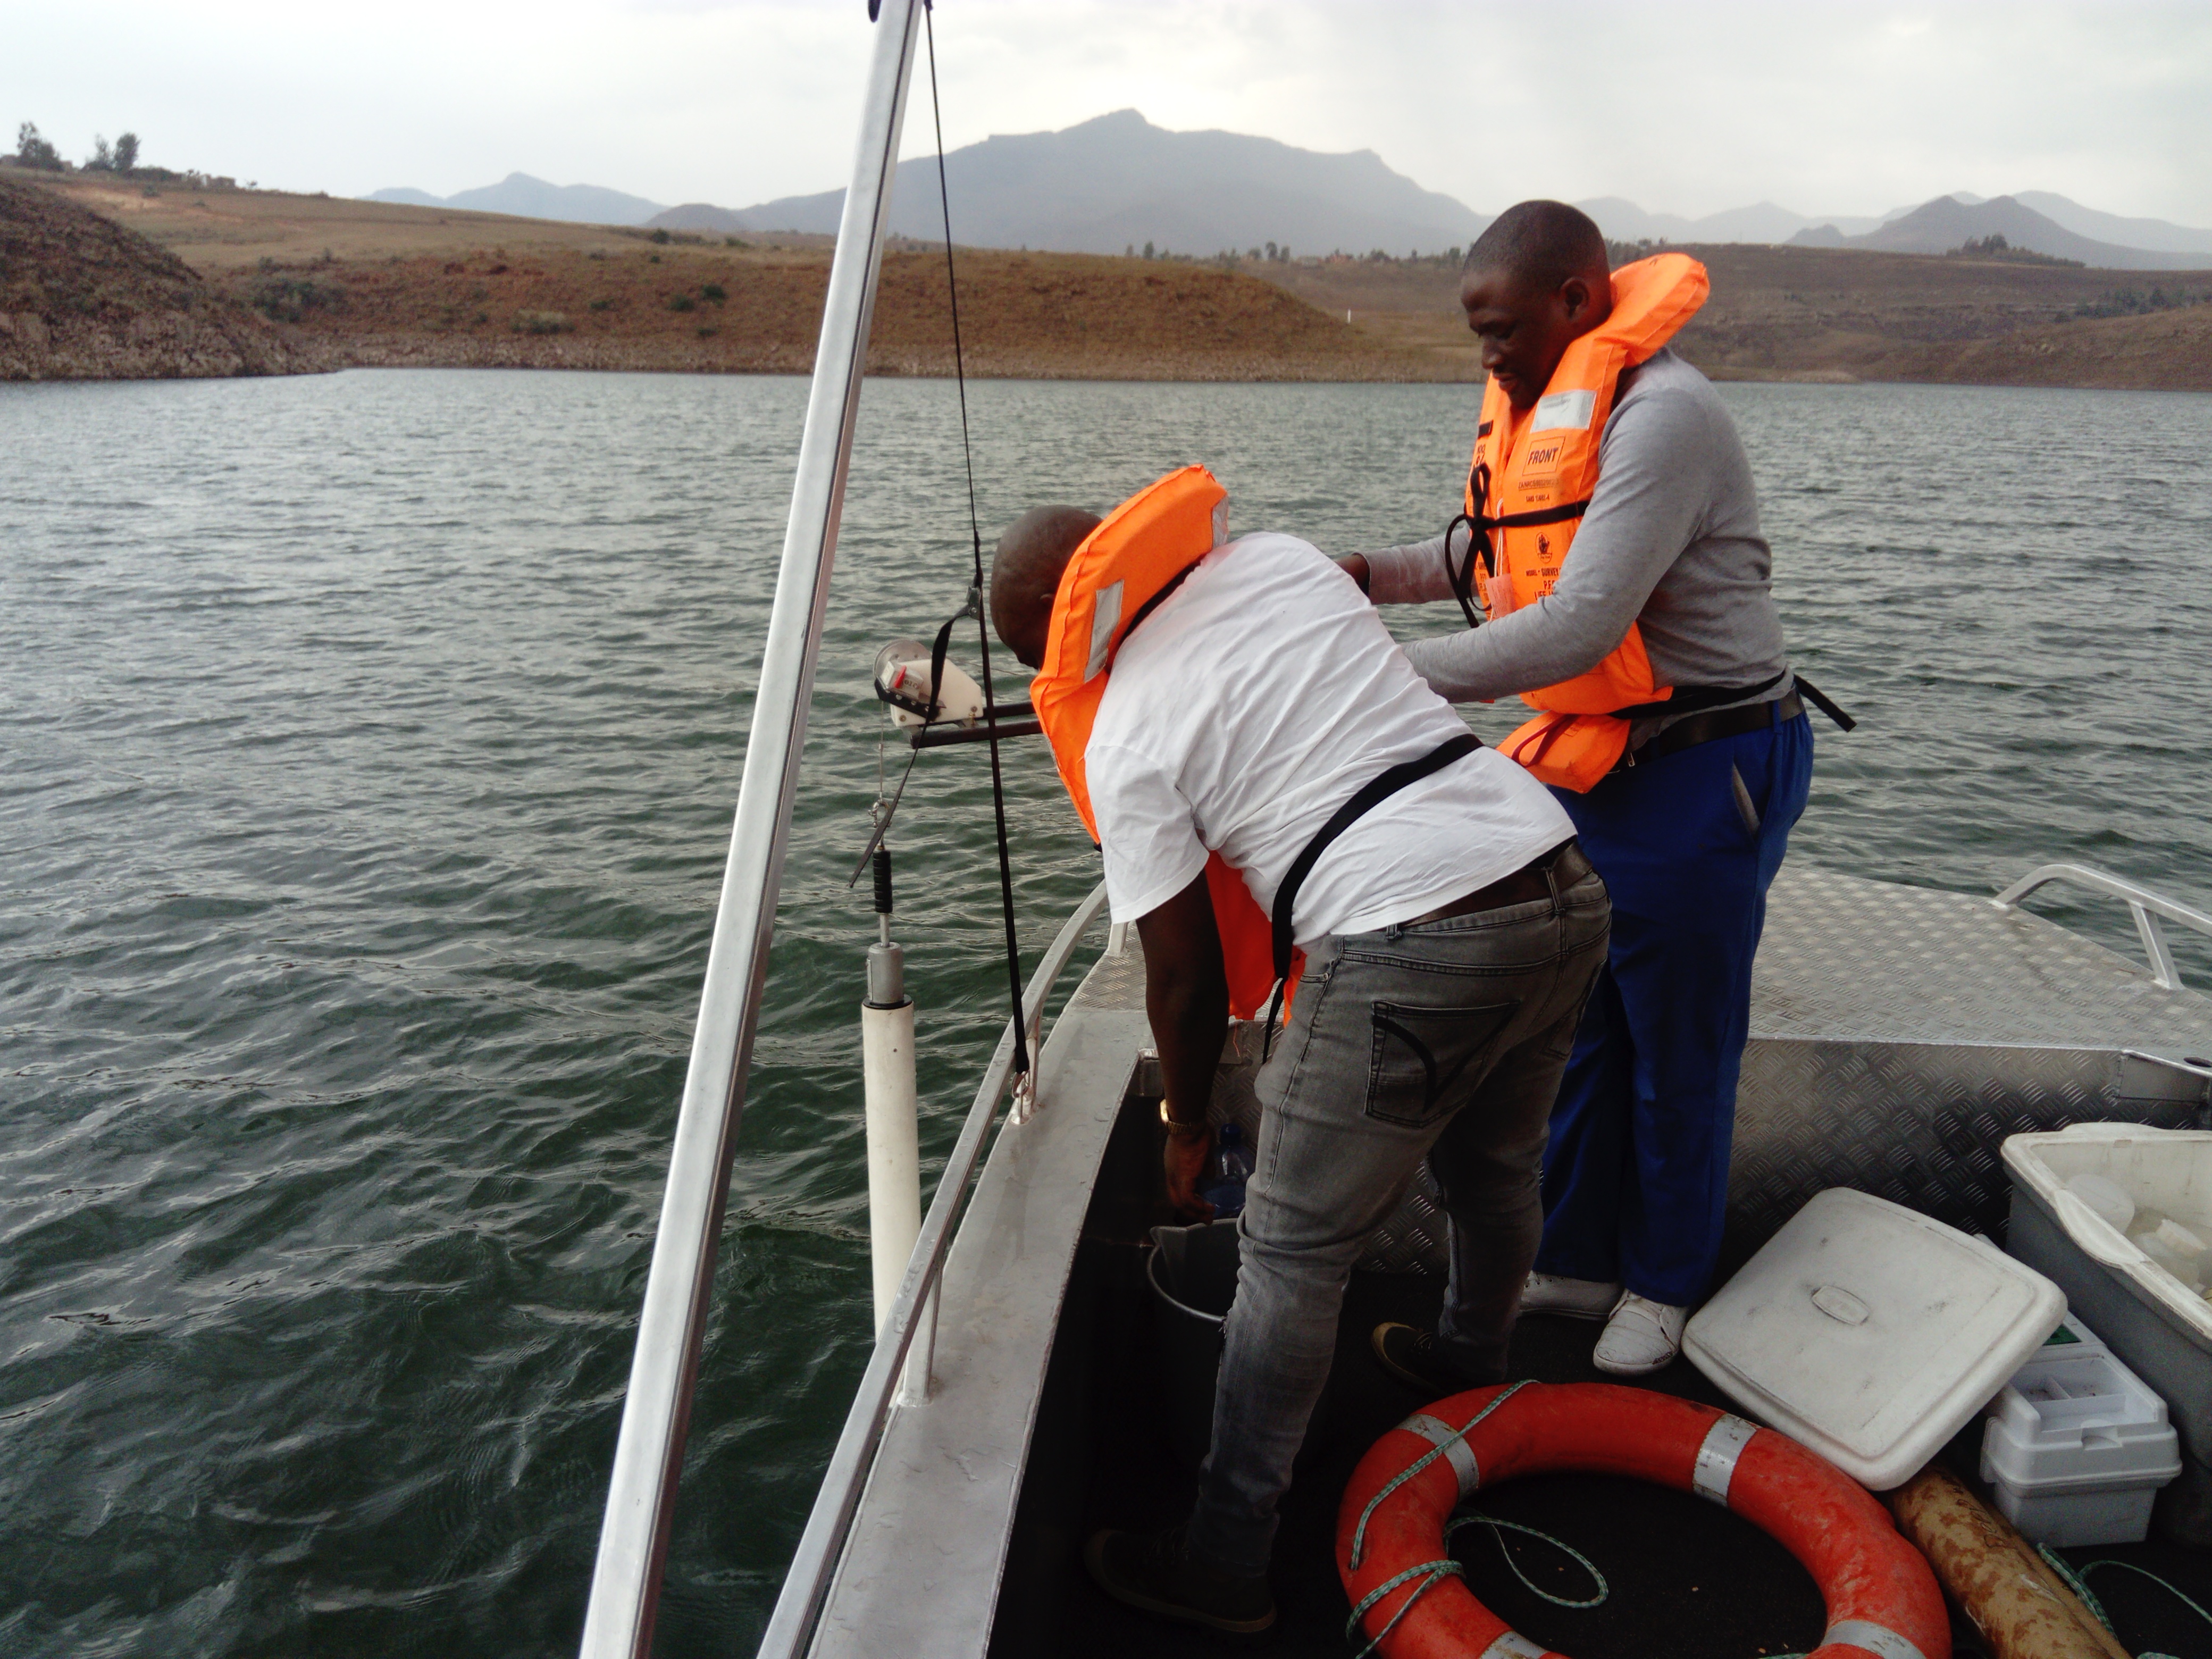 Ntiea and a colleague collecting samples from a boat. For large waterbodies such as lakes and reservoirs, small craft such as this are necessary to collect samples from different points in the water column and from the lake bed.